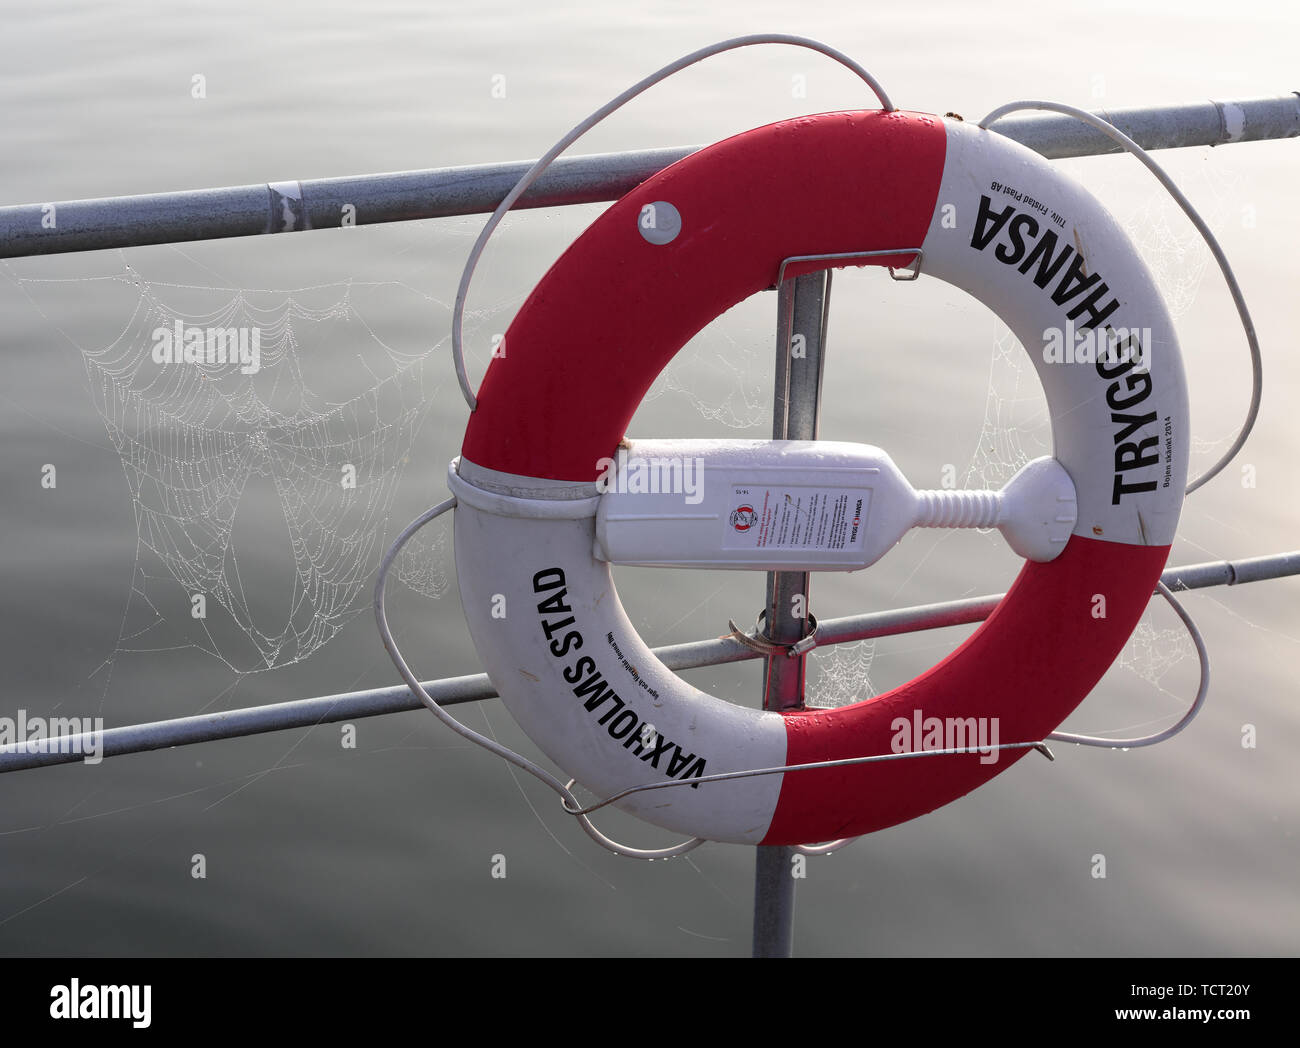 Trygg-hansa rescue buoy hanging off a metal fence at Karlsudd jetty near  Vaxholm, Sweden Stock Photo - Alamy